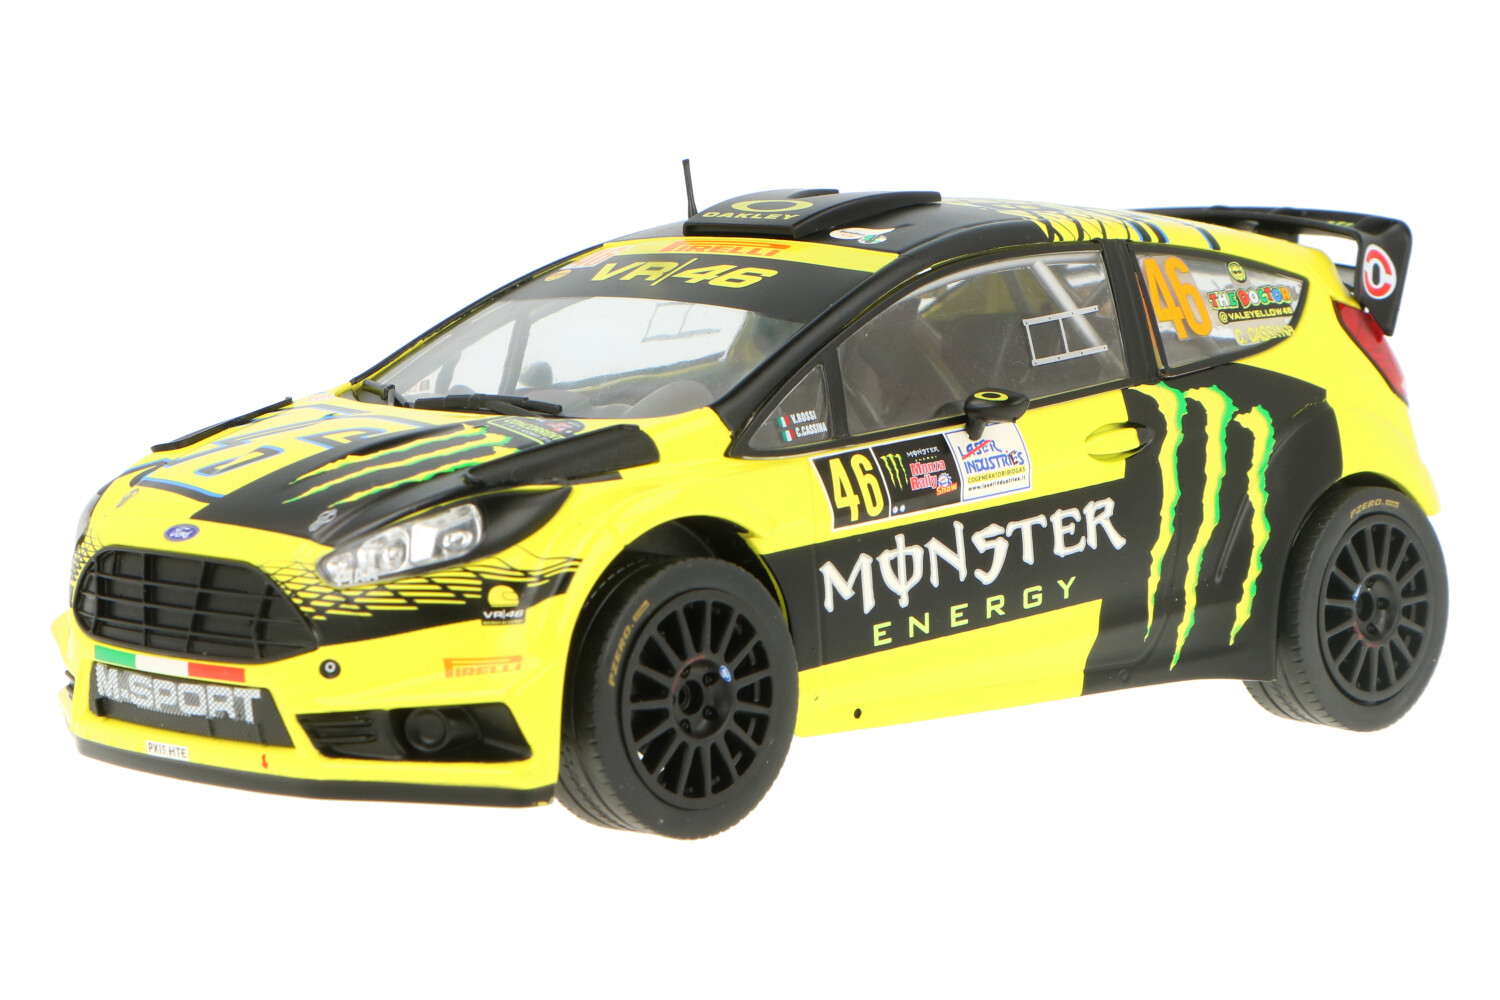 Ford-Fiesta-RS-WRC-Rossi-18RMC015_13154895102324453Ford-Fiesta-RS-WRC-Rossi-18RMC015_Houseofmodelcars_.jpg